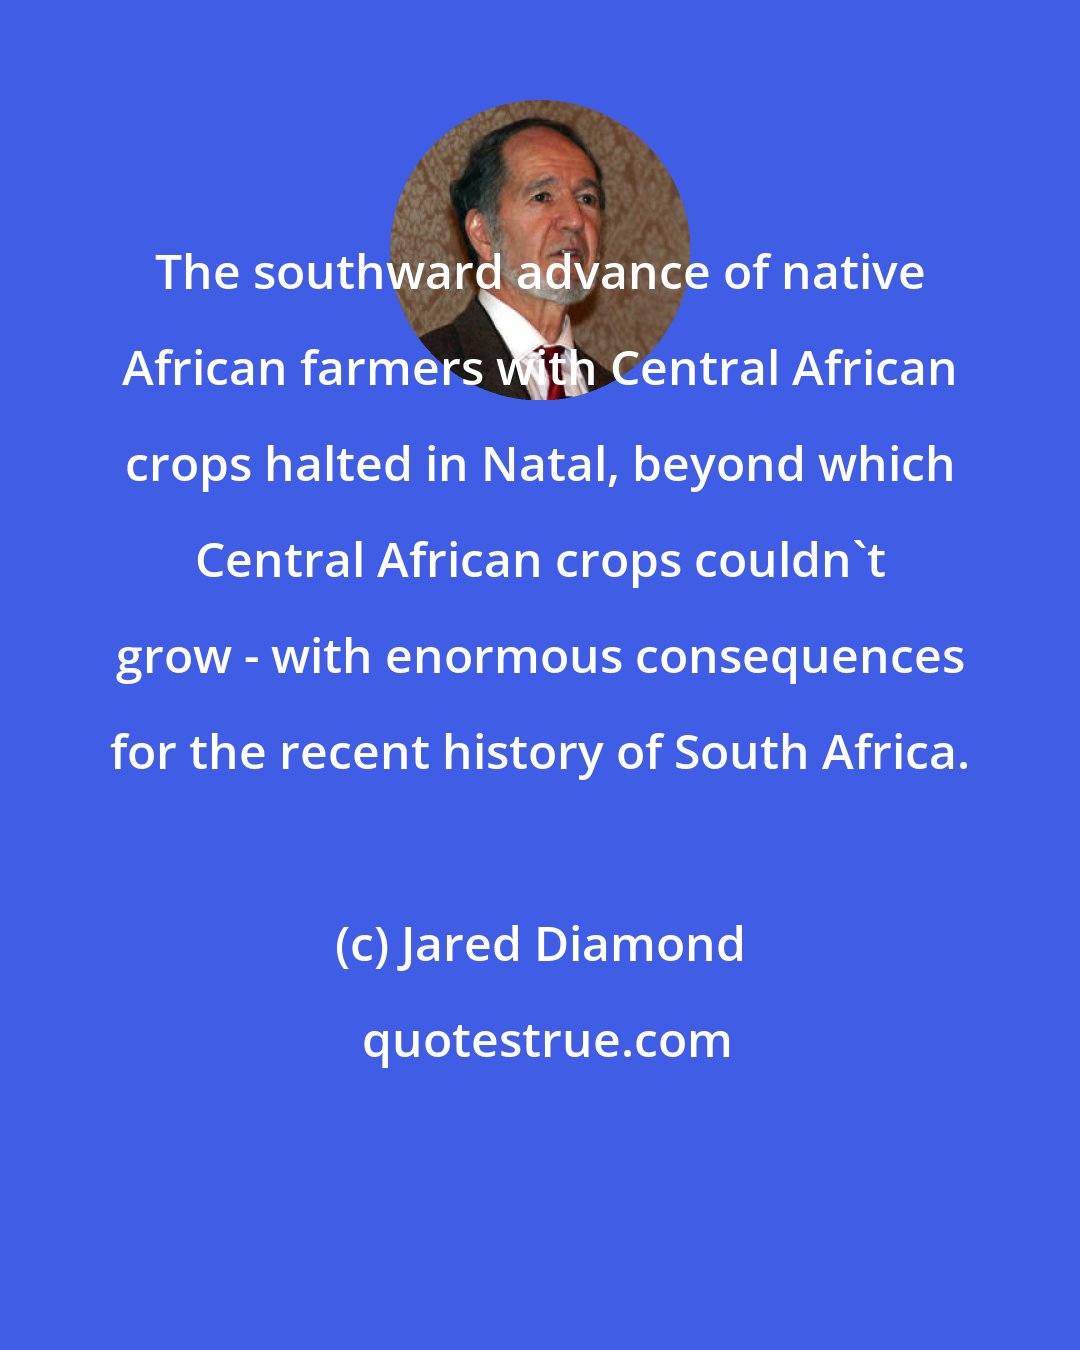 Jared Diamond: The southward advance of native African farmers with Central African crops halted in Natal, beyond which Central African crops couldn't grow - with enormous consequences for the recent history of South Africa.